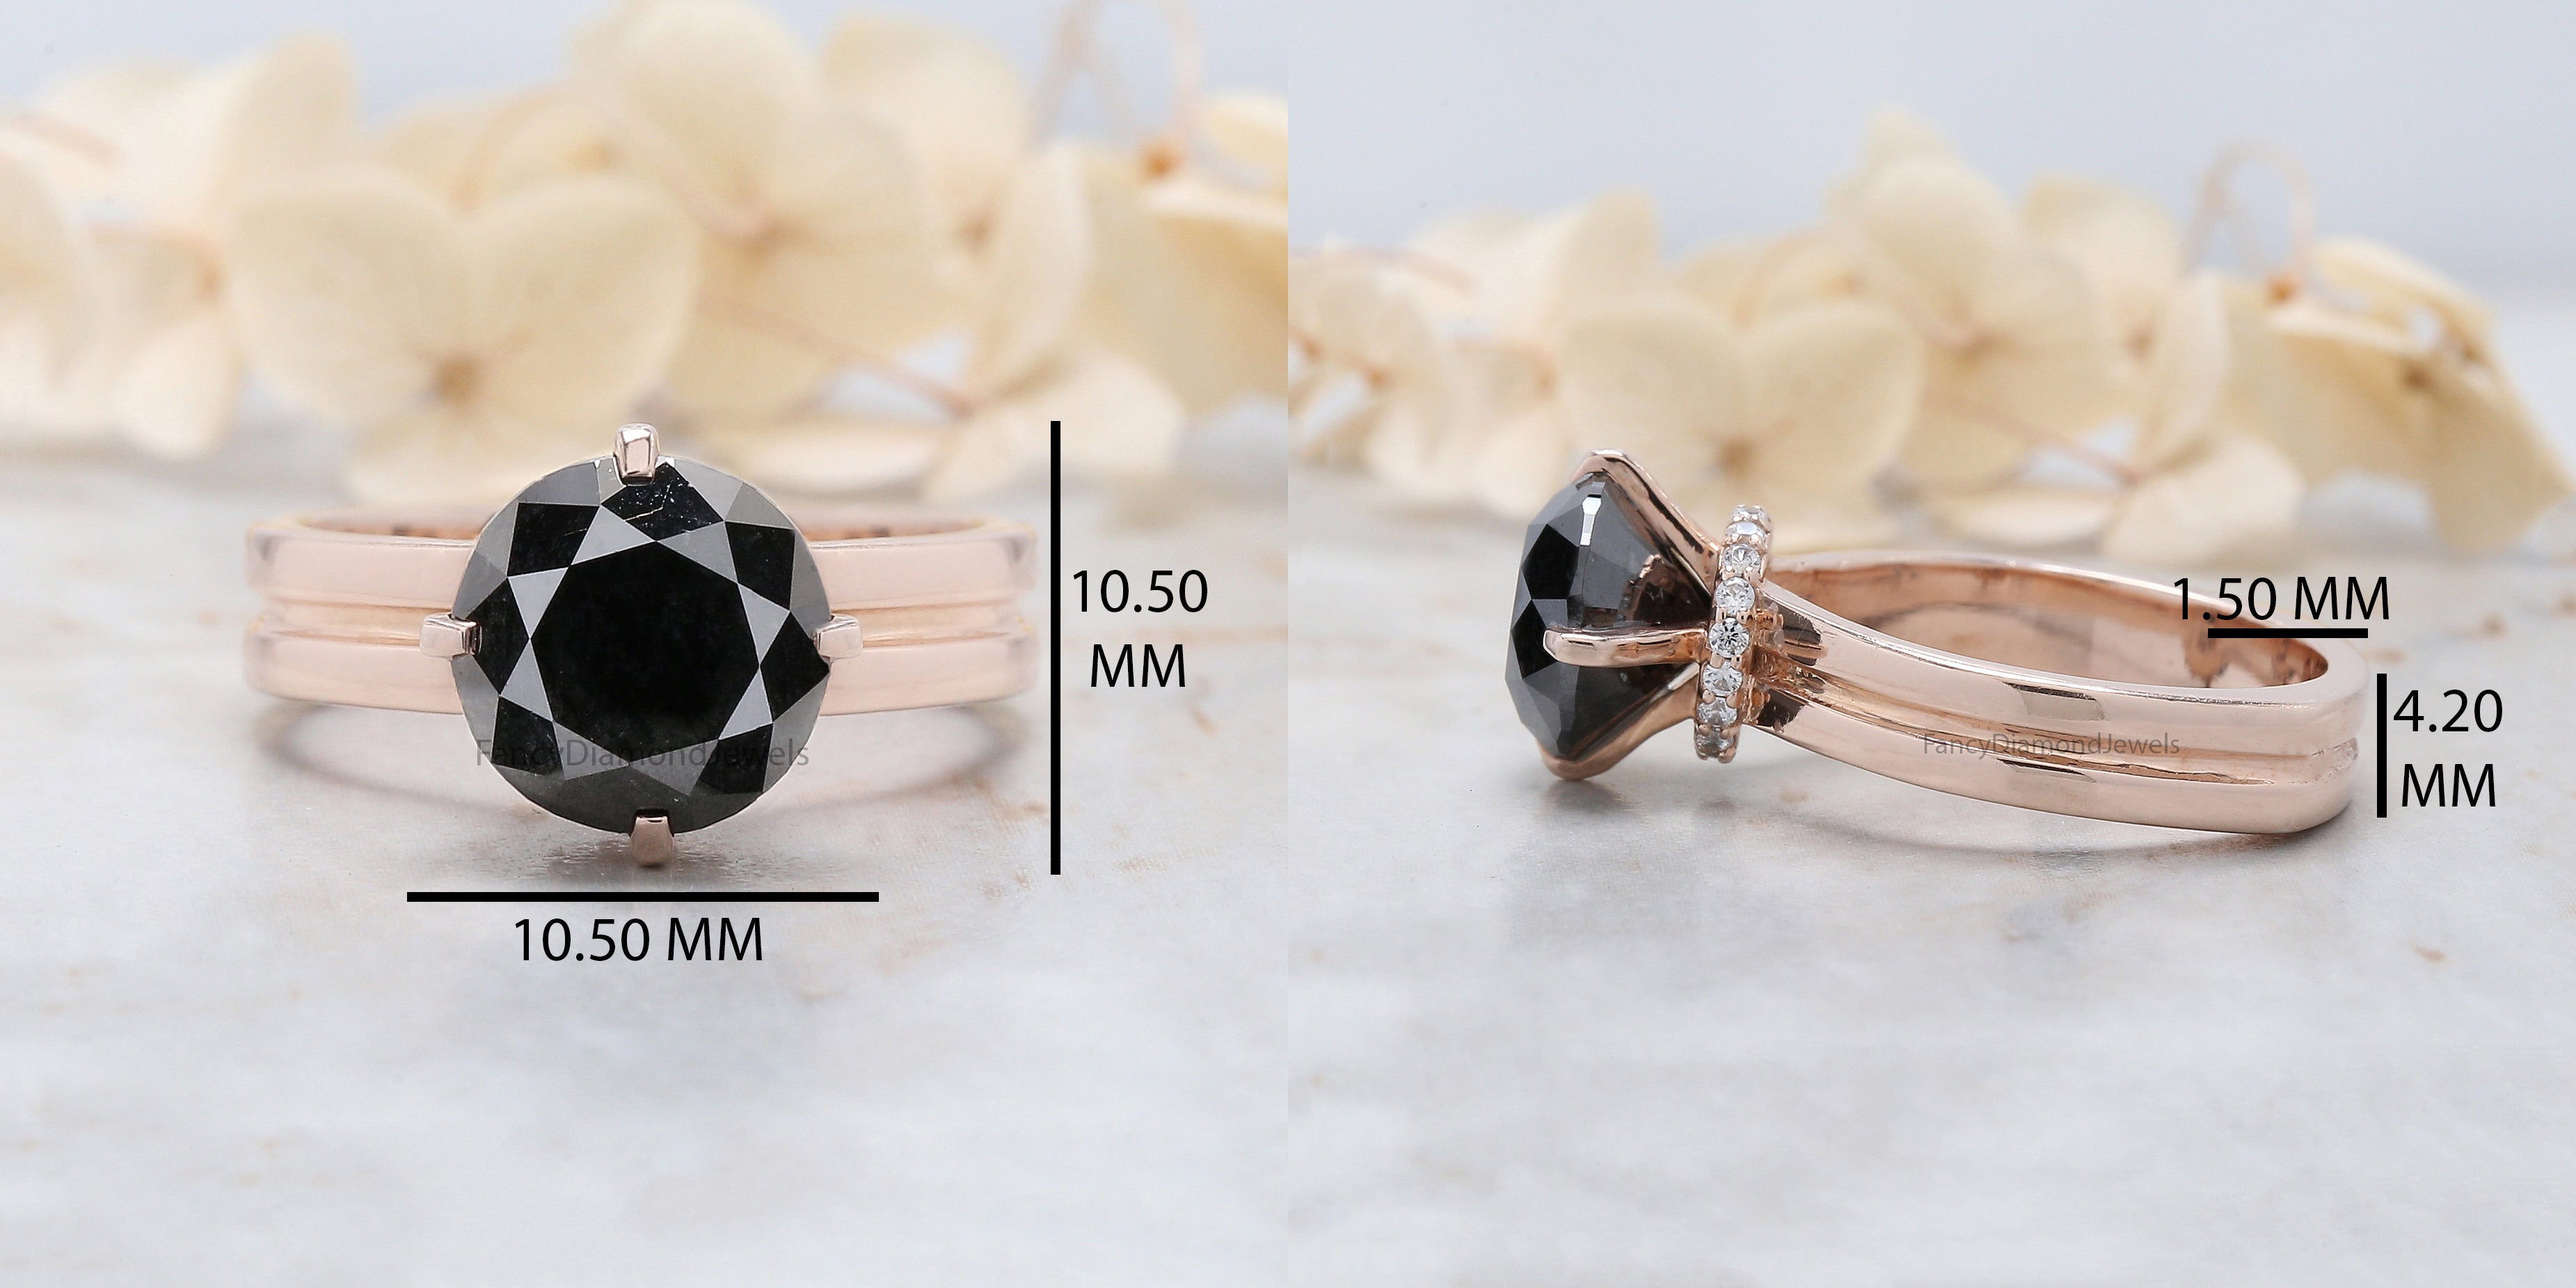 Round Cut Black Color Diamond Ring 3.76 Ct 9.30 MM Round Shape Diamond Ring 14K Solid Rose Gold Silver Engagement Ring Gift For Her QL8487